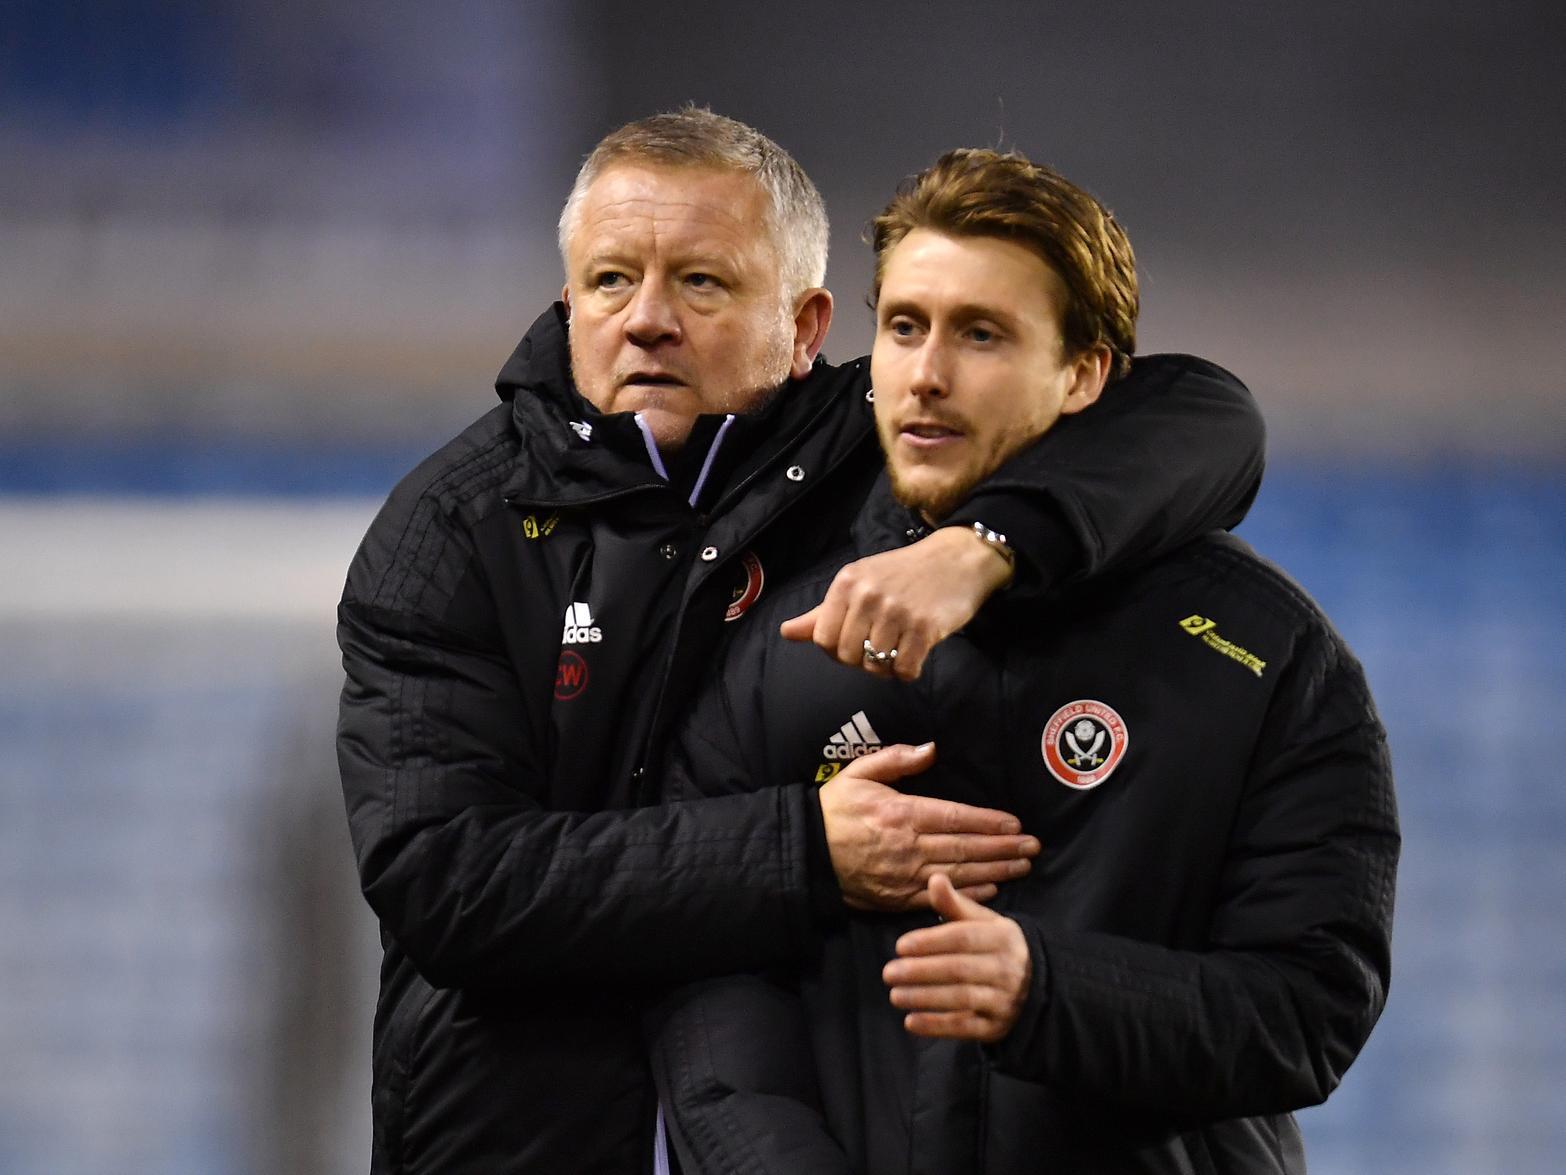 Sheffield United midfielder Luke Freeman, a rumoured target of Leeds United, was said to be the subject of a late deadline day loan bid from Rangers, but the Blades rejected the offer. (Sheffield Star)